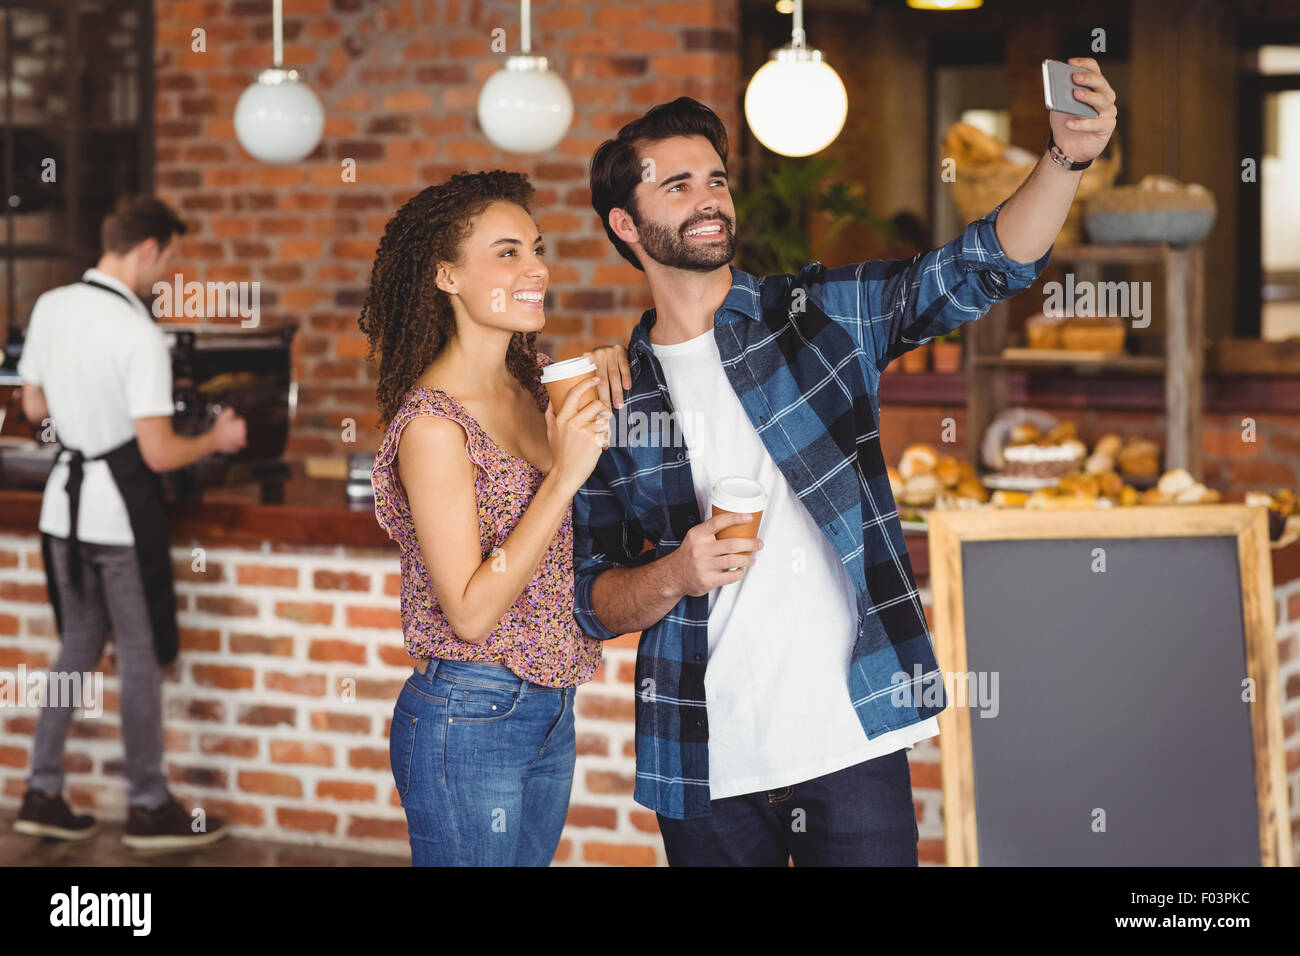 Smiling hipster couple taking selfies Stock Photo